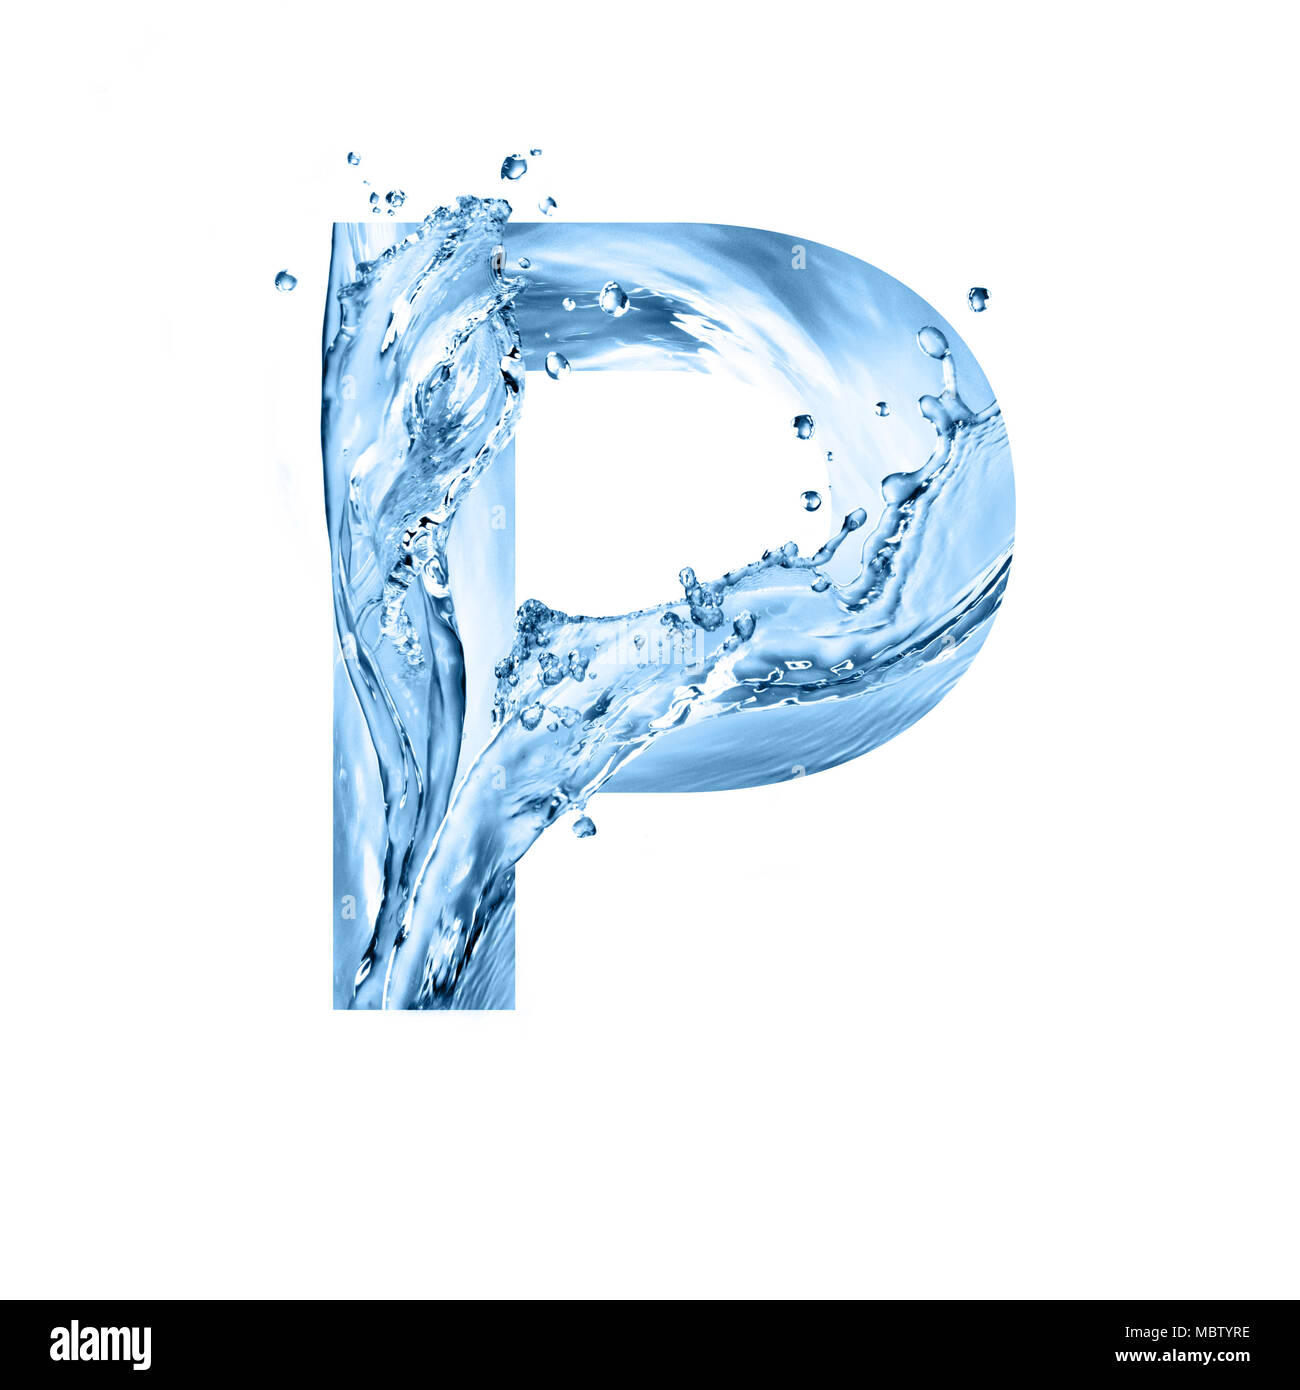 stylized font, art text made of water splashes, capital letter p, isolated on white background Stock Photo